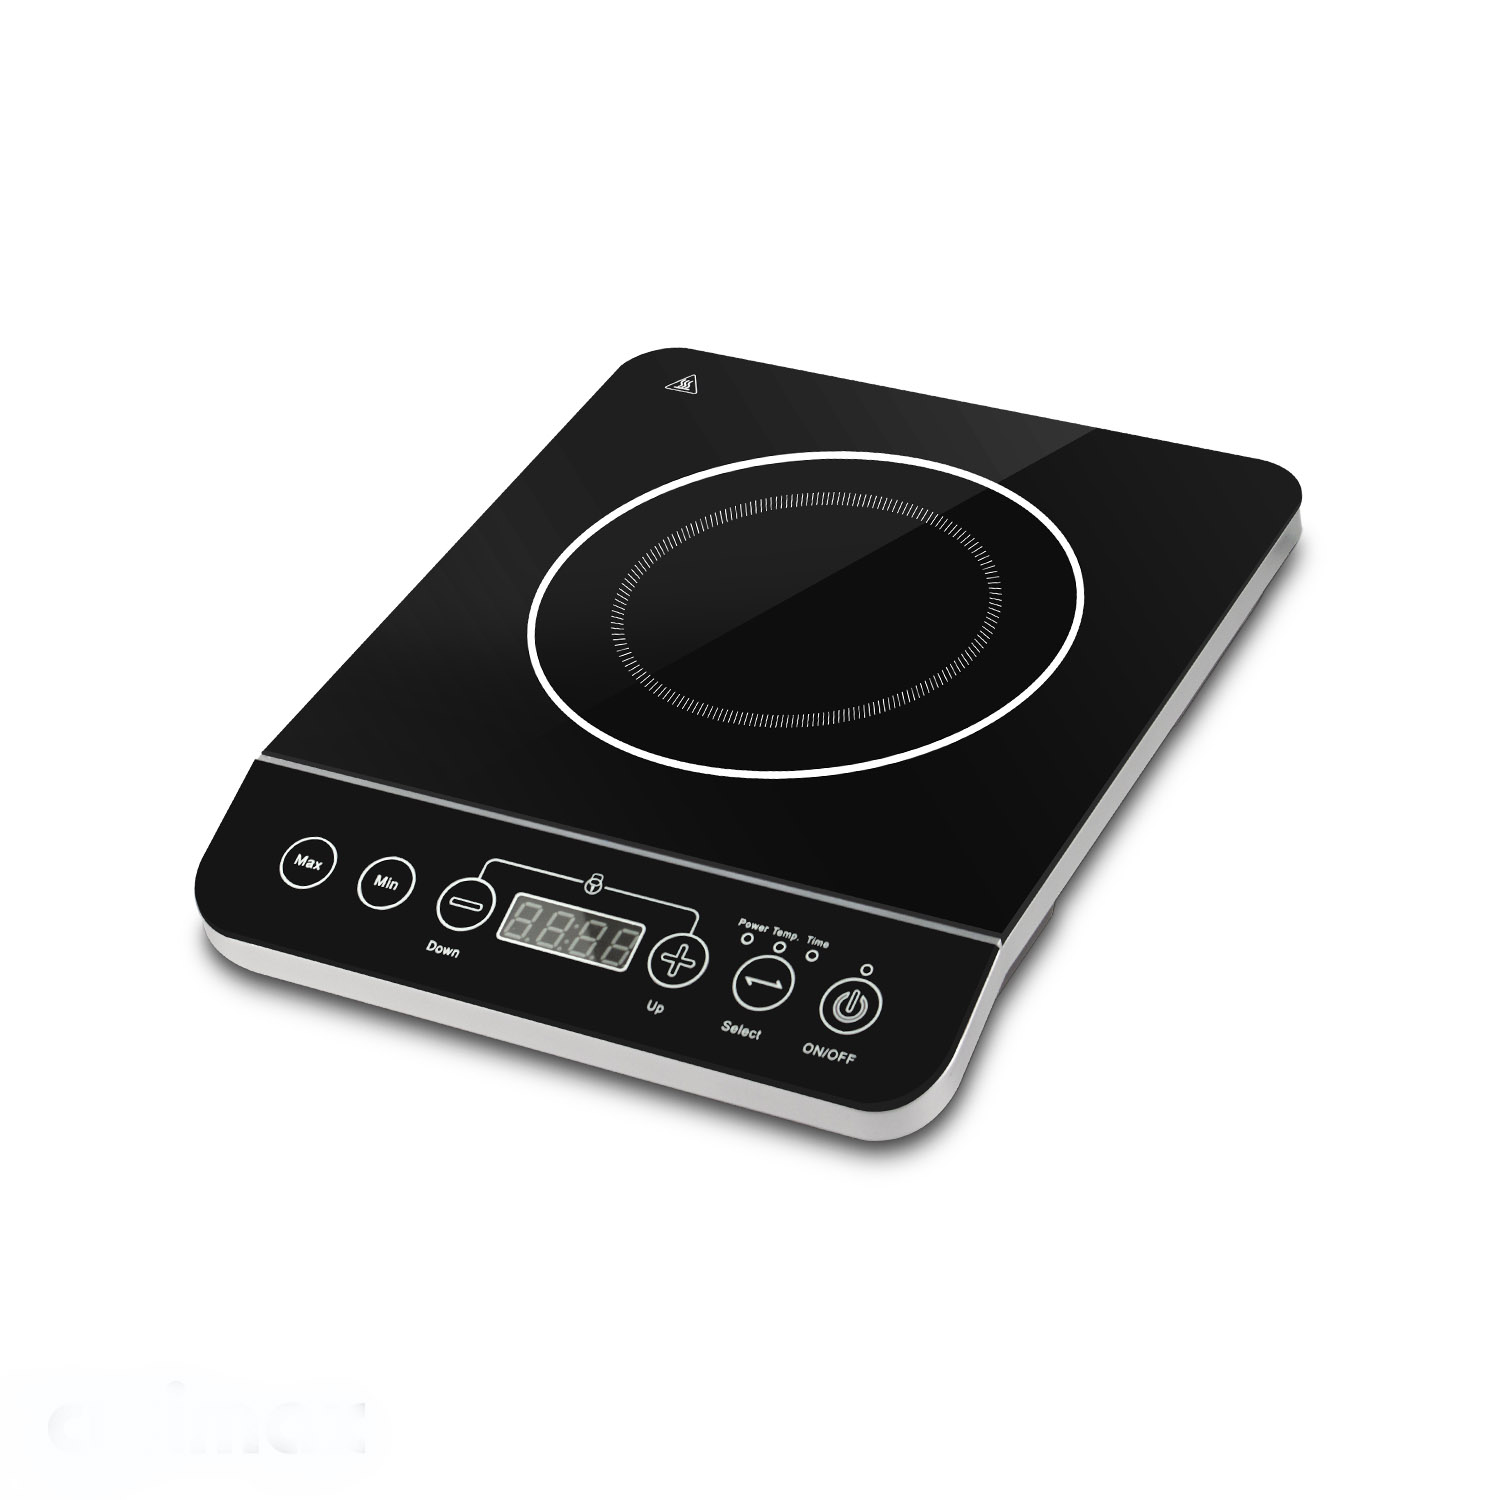 Cusimax Induction Cooktop,1800W Stainless Steel Portable Induction Burner with Timer,Sensor Touch Countertop Burner,Kid Safety Lock,10 Temperature and 9 Power Setting